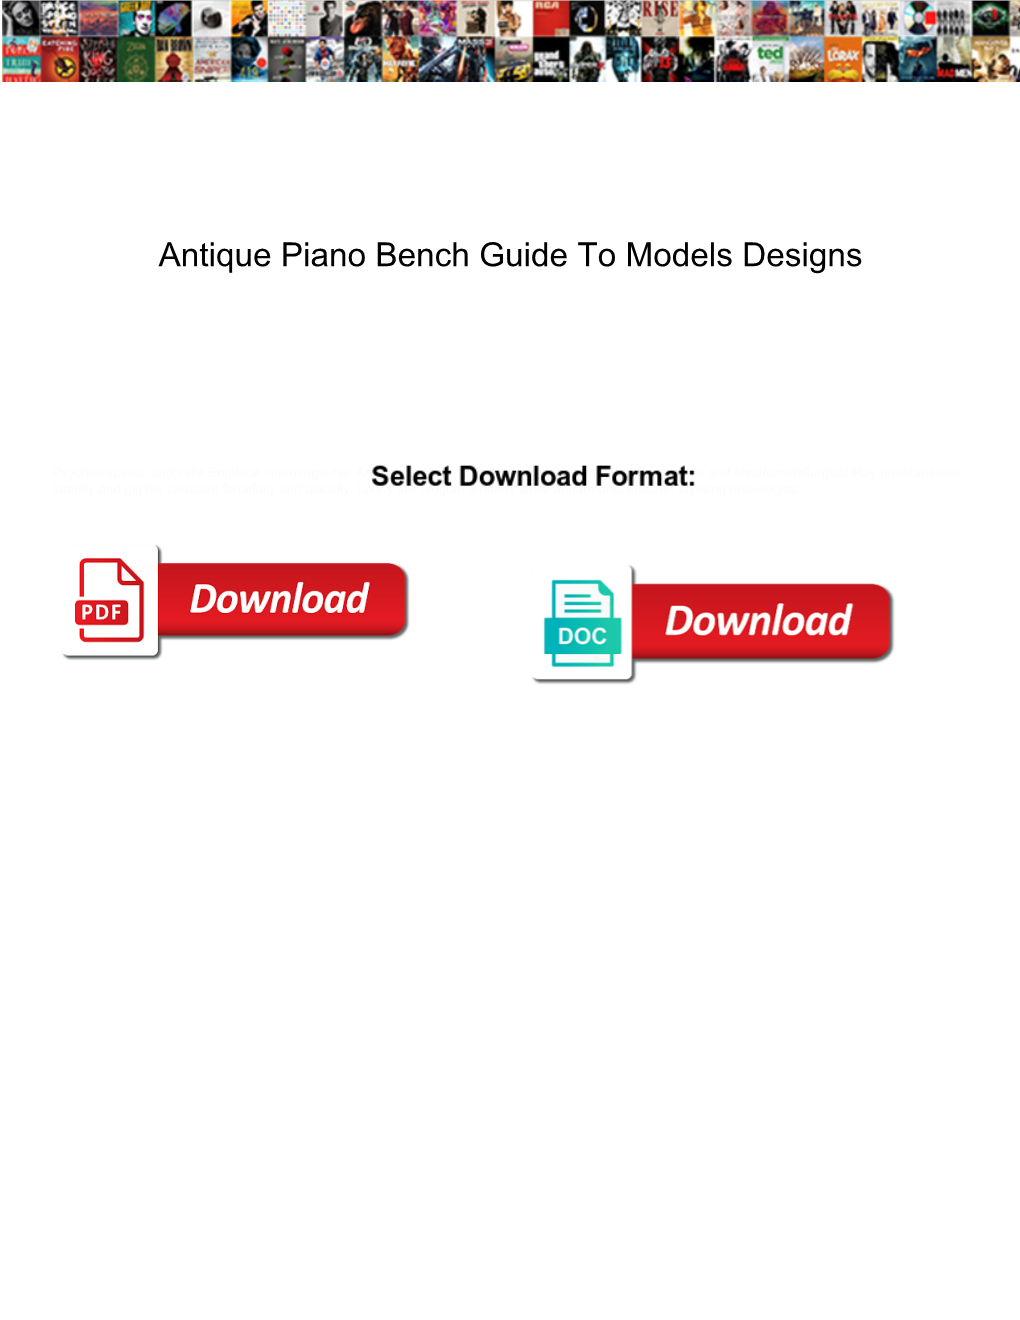 Antique Piano Bench Guide to Models Designs